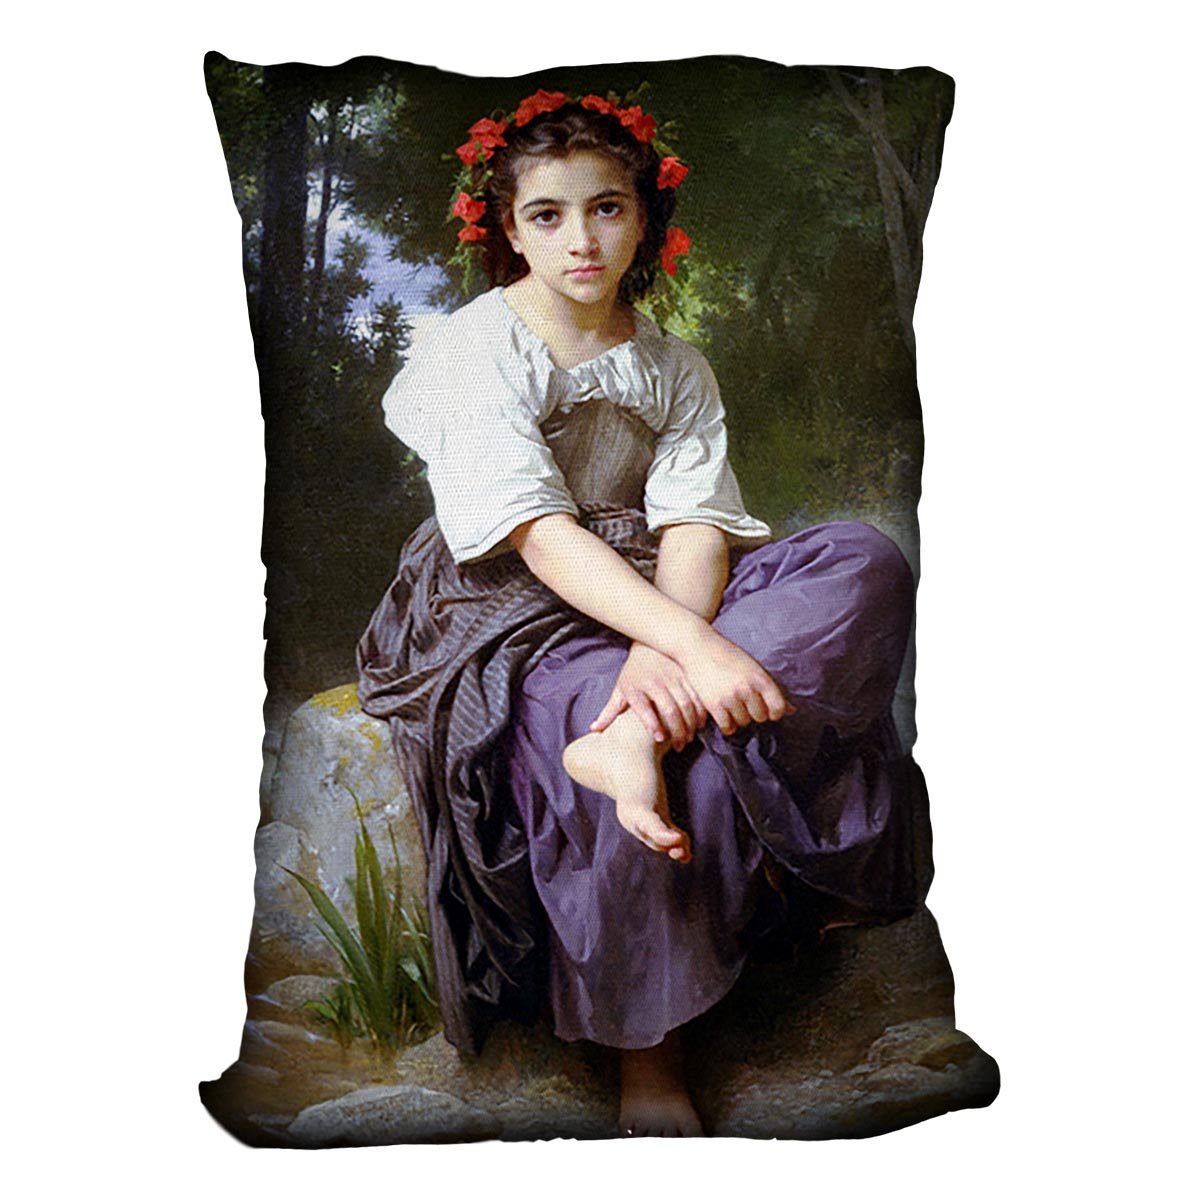 At the Edge of the Brook 2 By Bouguereau Throw Pillow